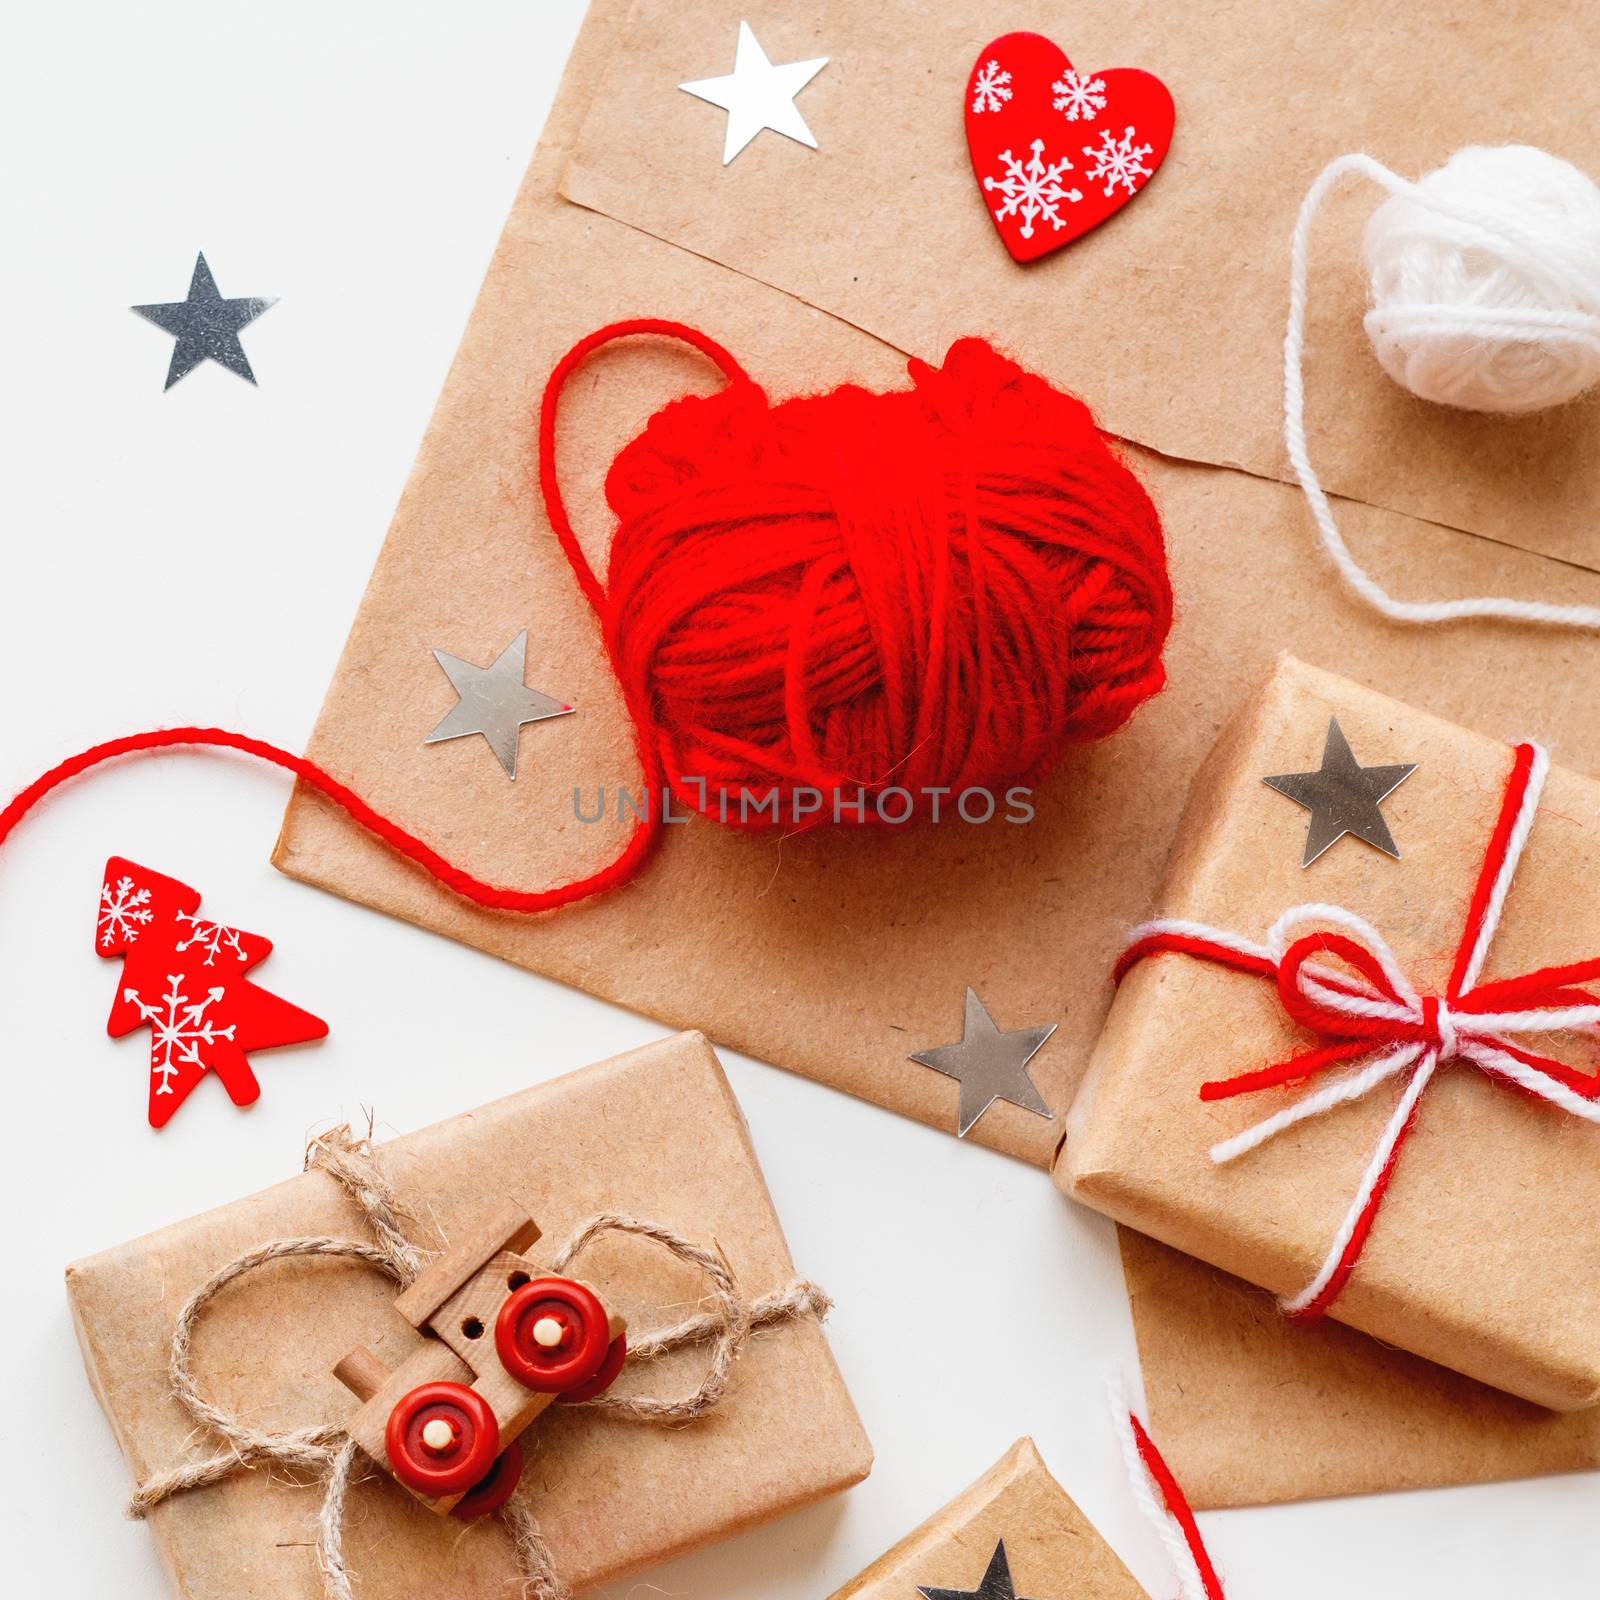 Packed Christmas and New Year DIY presents in craft paper. Gifts tied with threads. Boxes, red heart and Christmas tree symbols on white background.